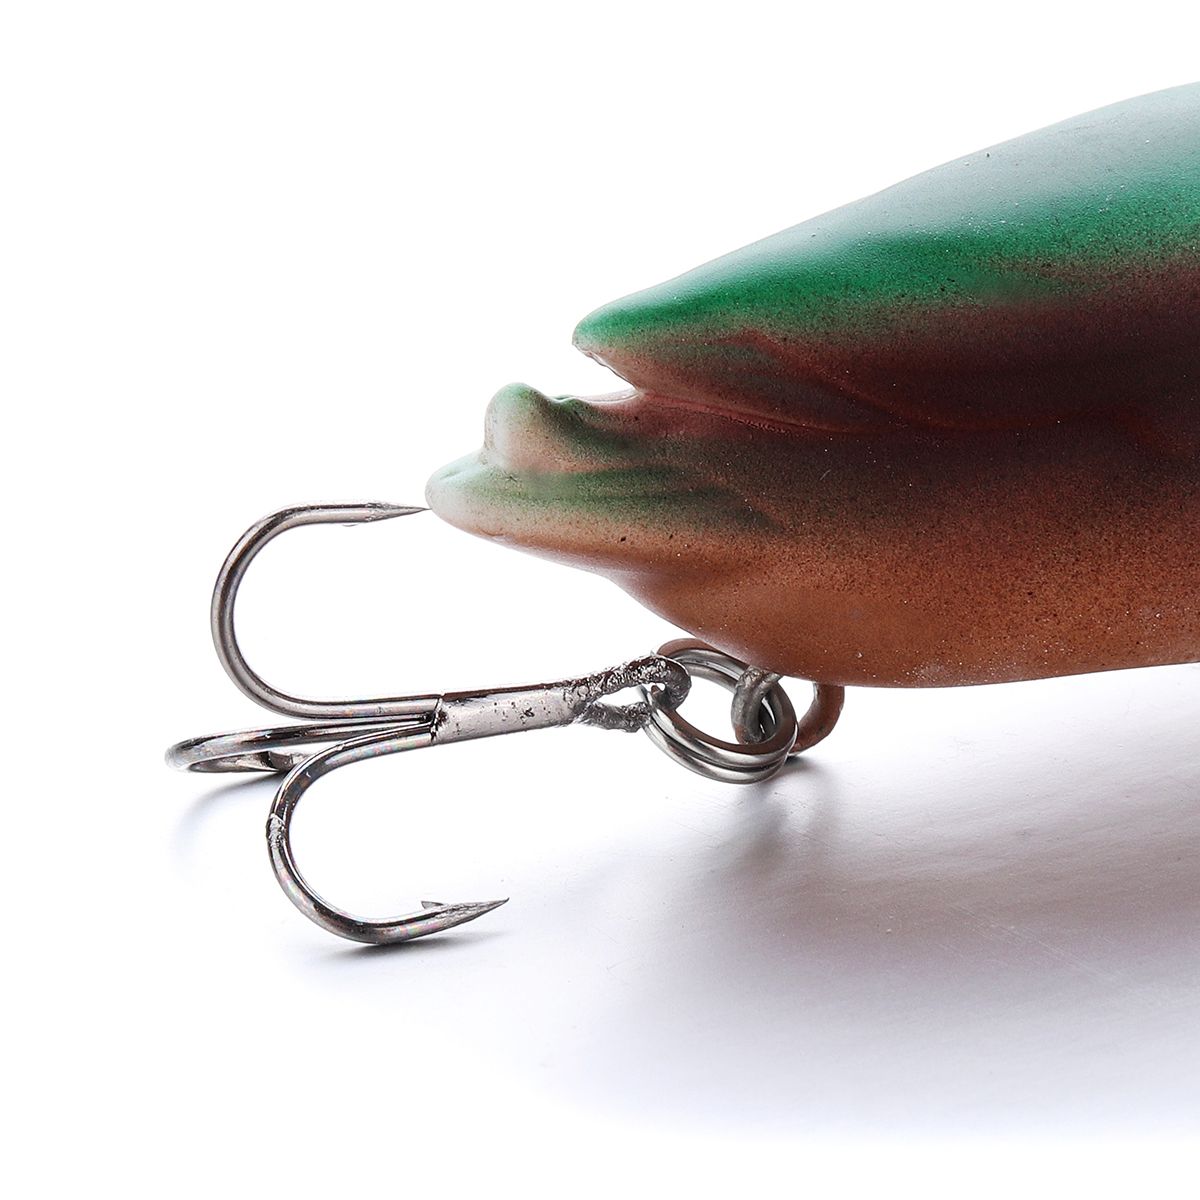 3D-Eyes-Duck-Lure-Artificial-Fishing-Bait-Catching-Topwater-With-Hooks-Fishing-1496193